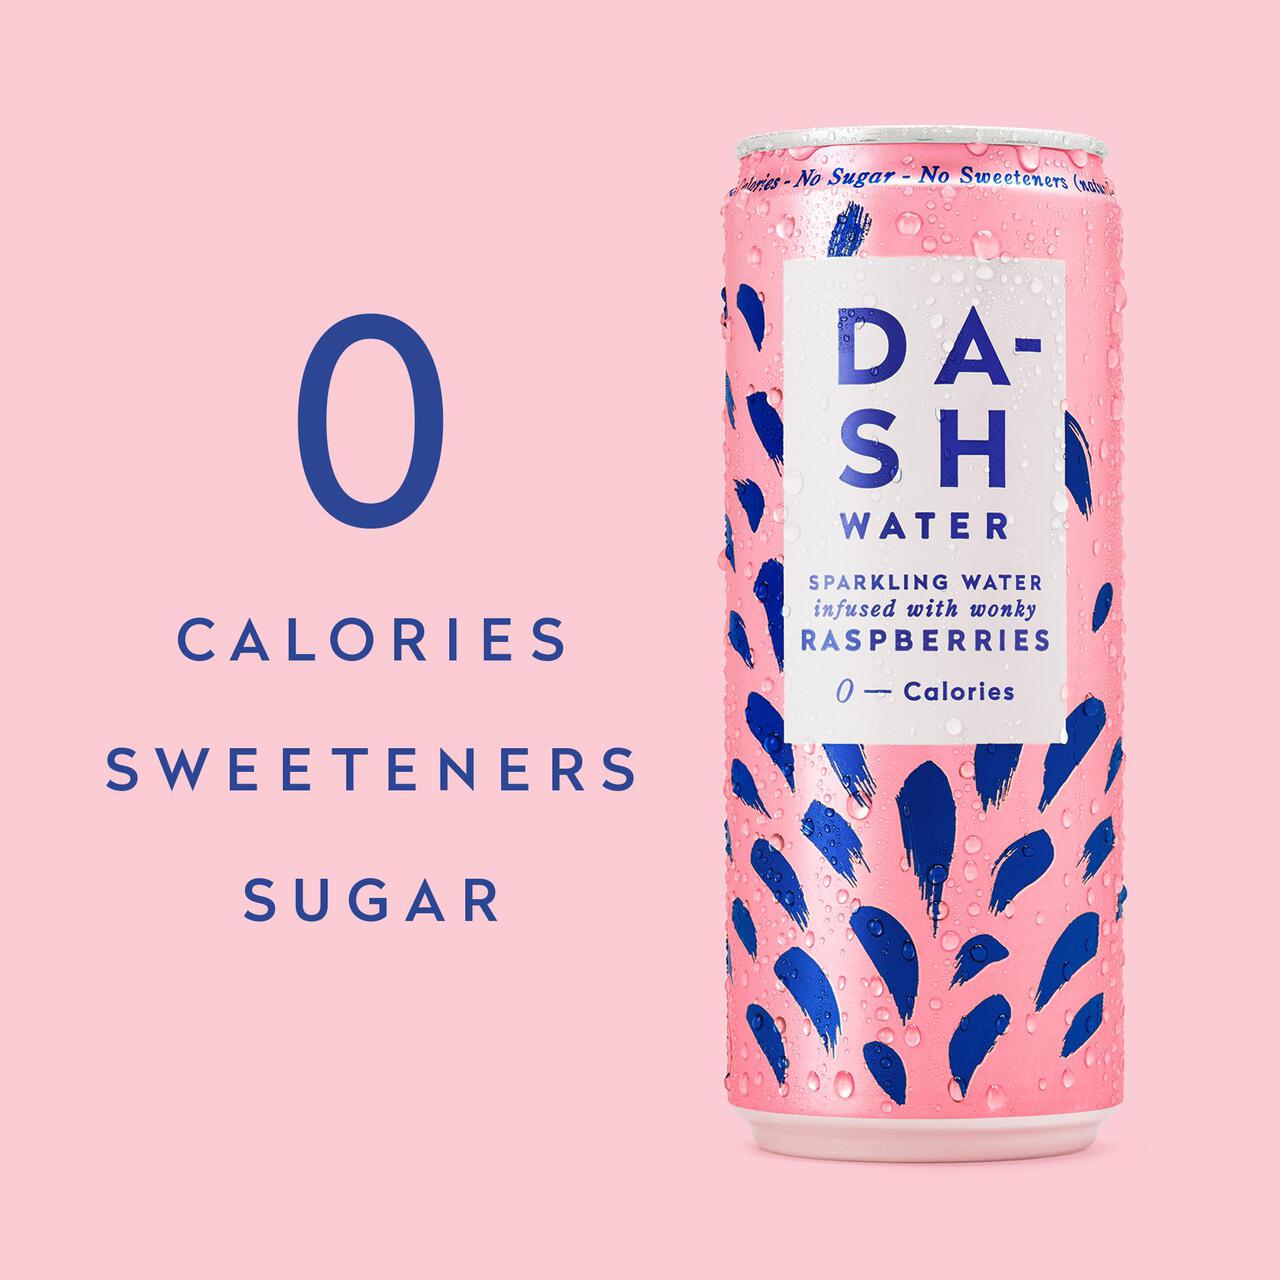 DASH Raspberry Infused Sparkling Water 4 x 330ml